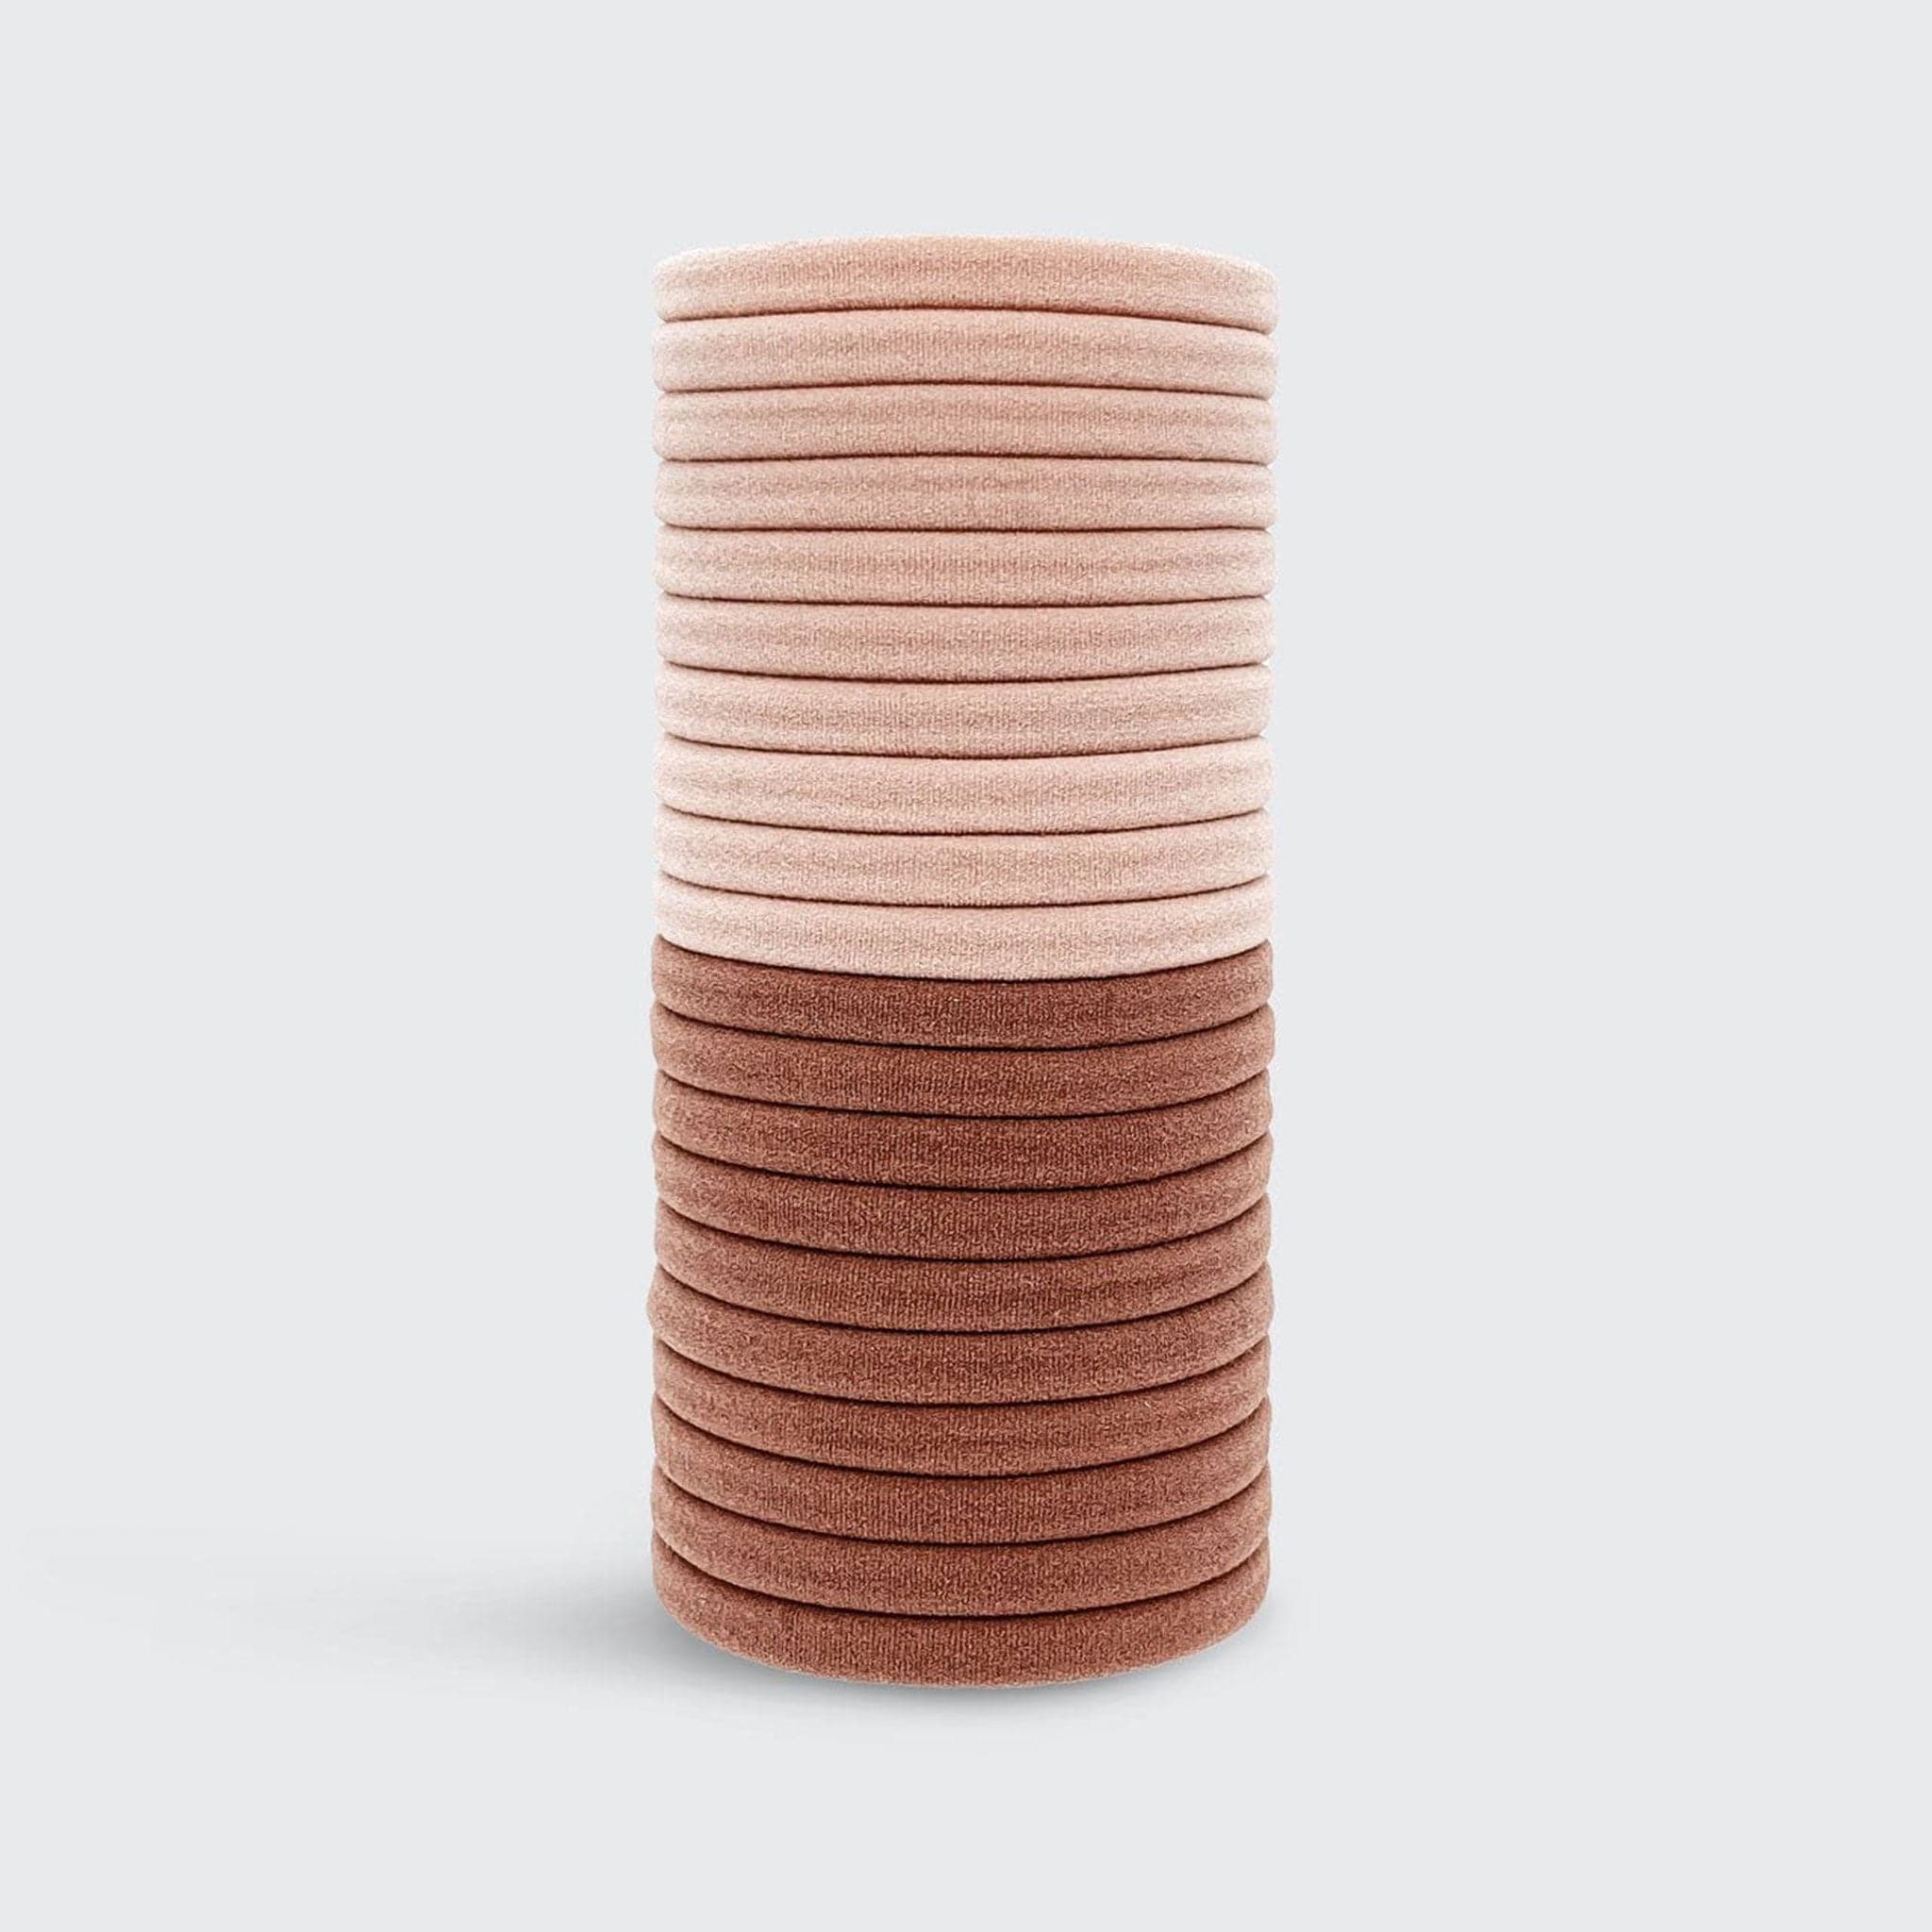 A stack of round recycled nylon elastic hair ties in a light pink shade and a slightly darker blush pink shade. 